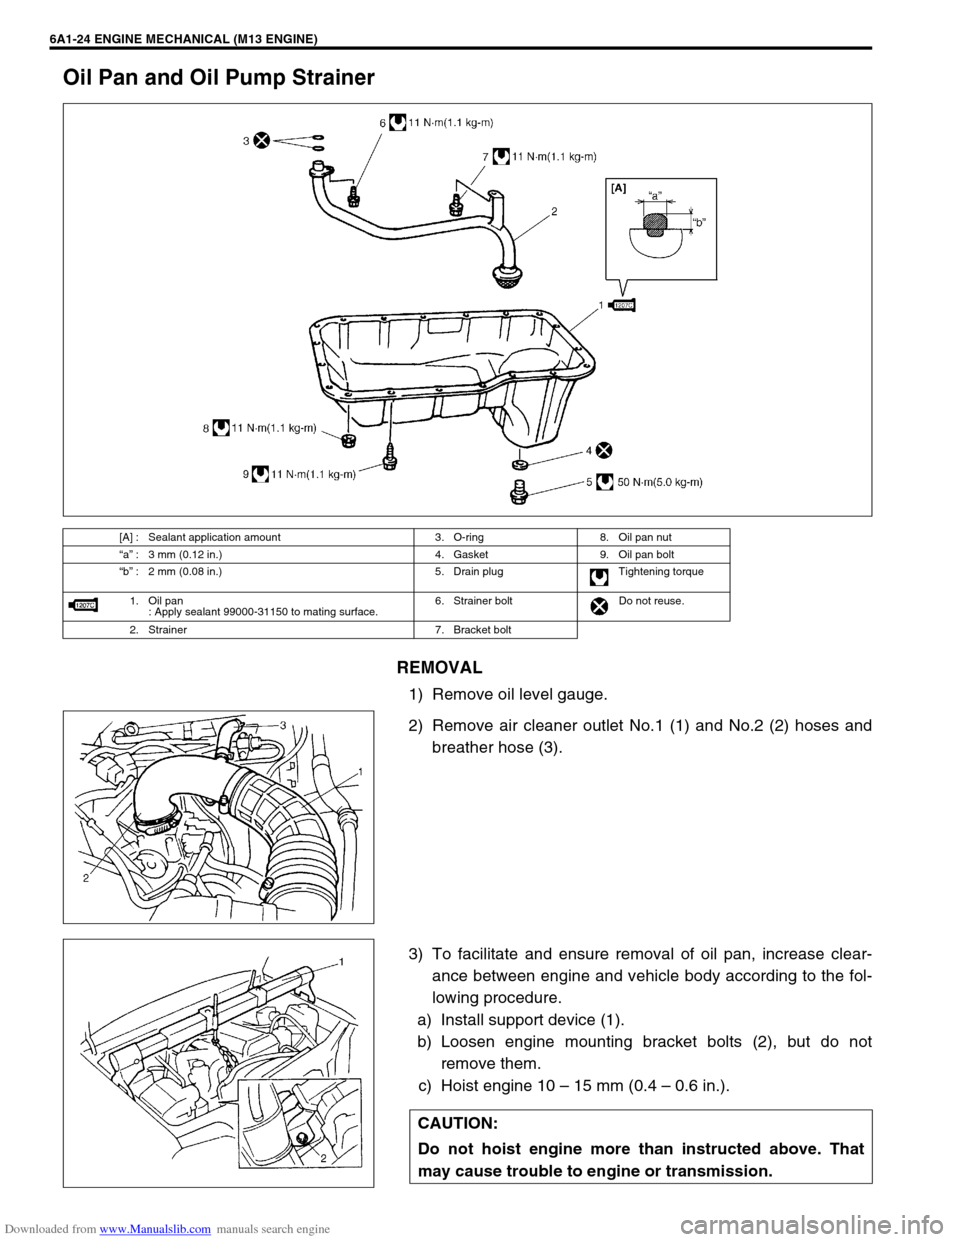 SUZUKI JIMNY 2005 3.G Service Owners Manual Downloaded from www.Manualslib.com manuals search engine 6A1-24 ENGINE MECHANICAL (M13 ENGINE)
Oil Pan and Oil Pump Strainer
REMOVAL
1) Remove oil level gauge.
2) Remove air cleaner outlet No.1 (1) an